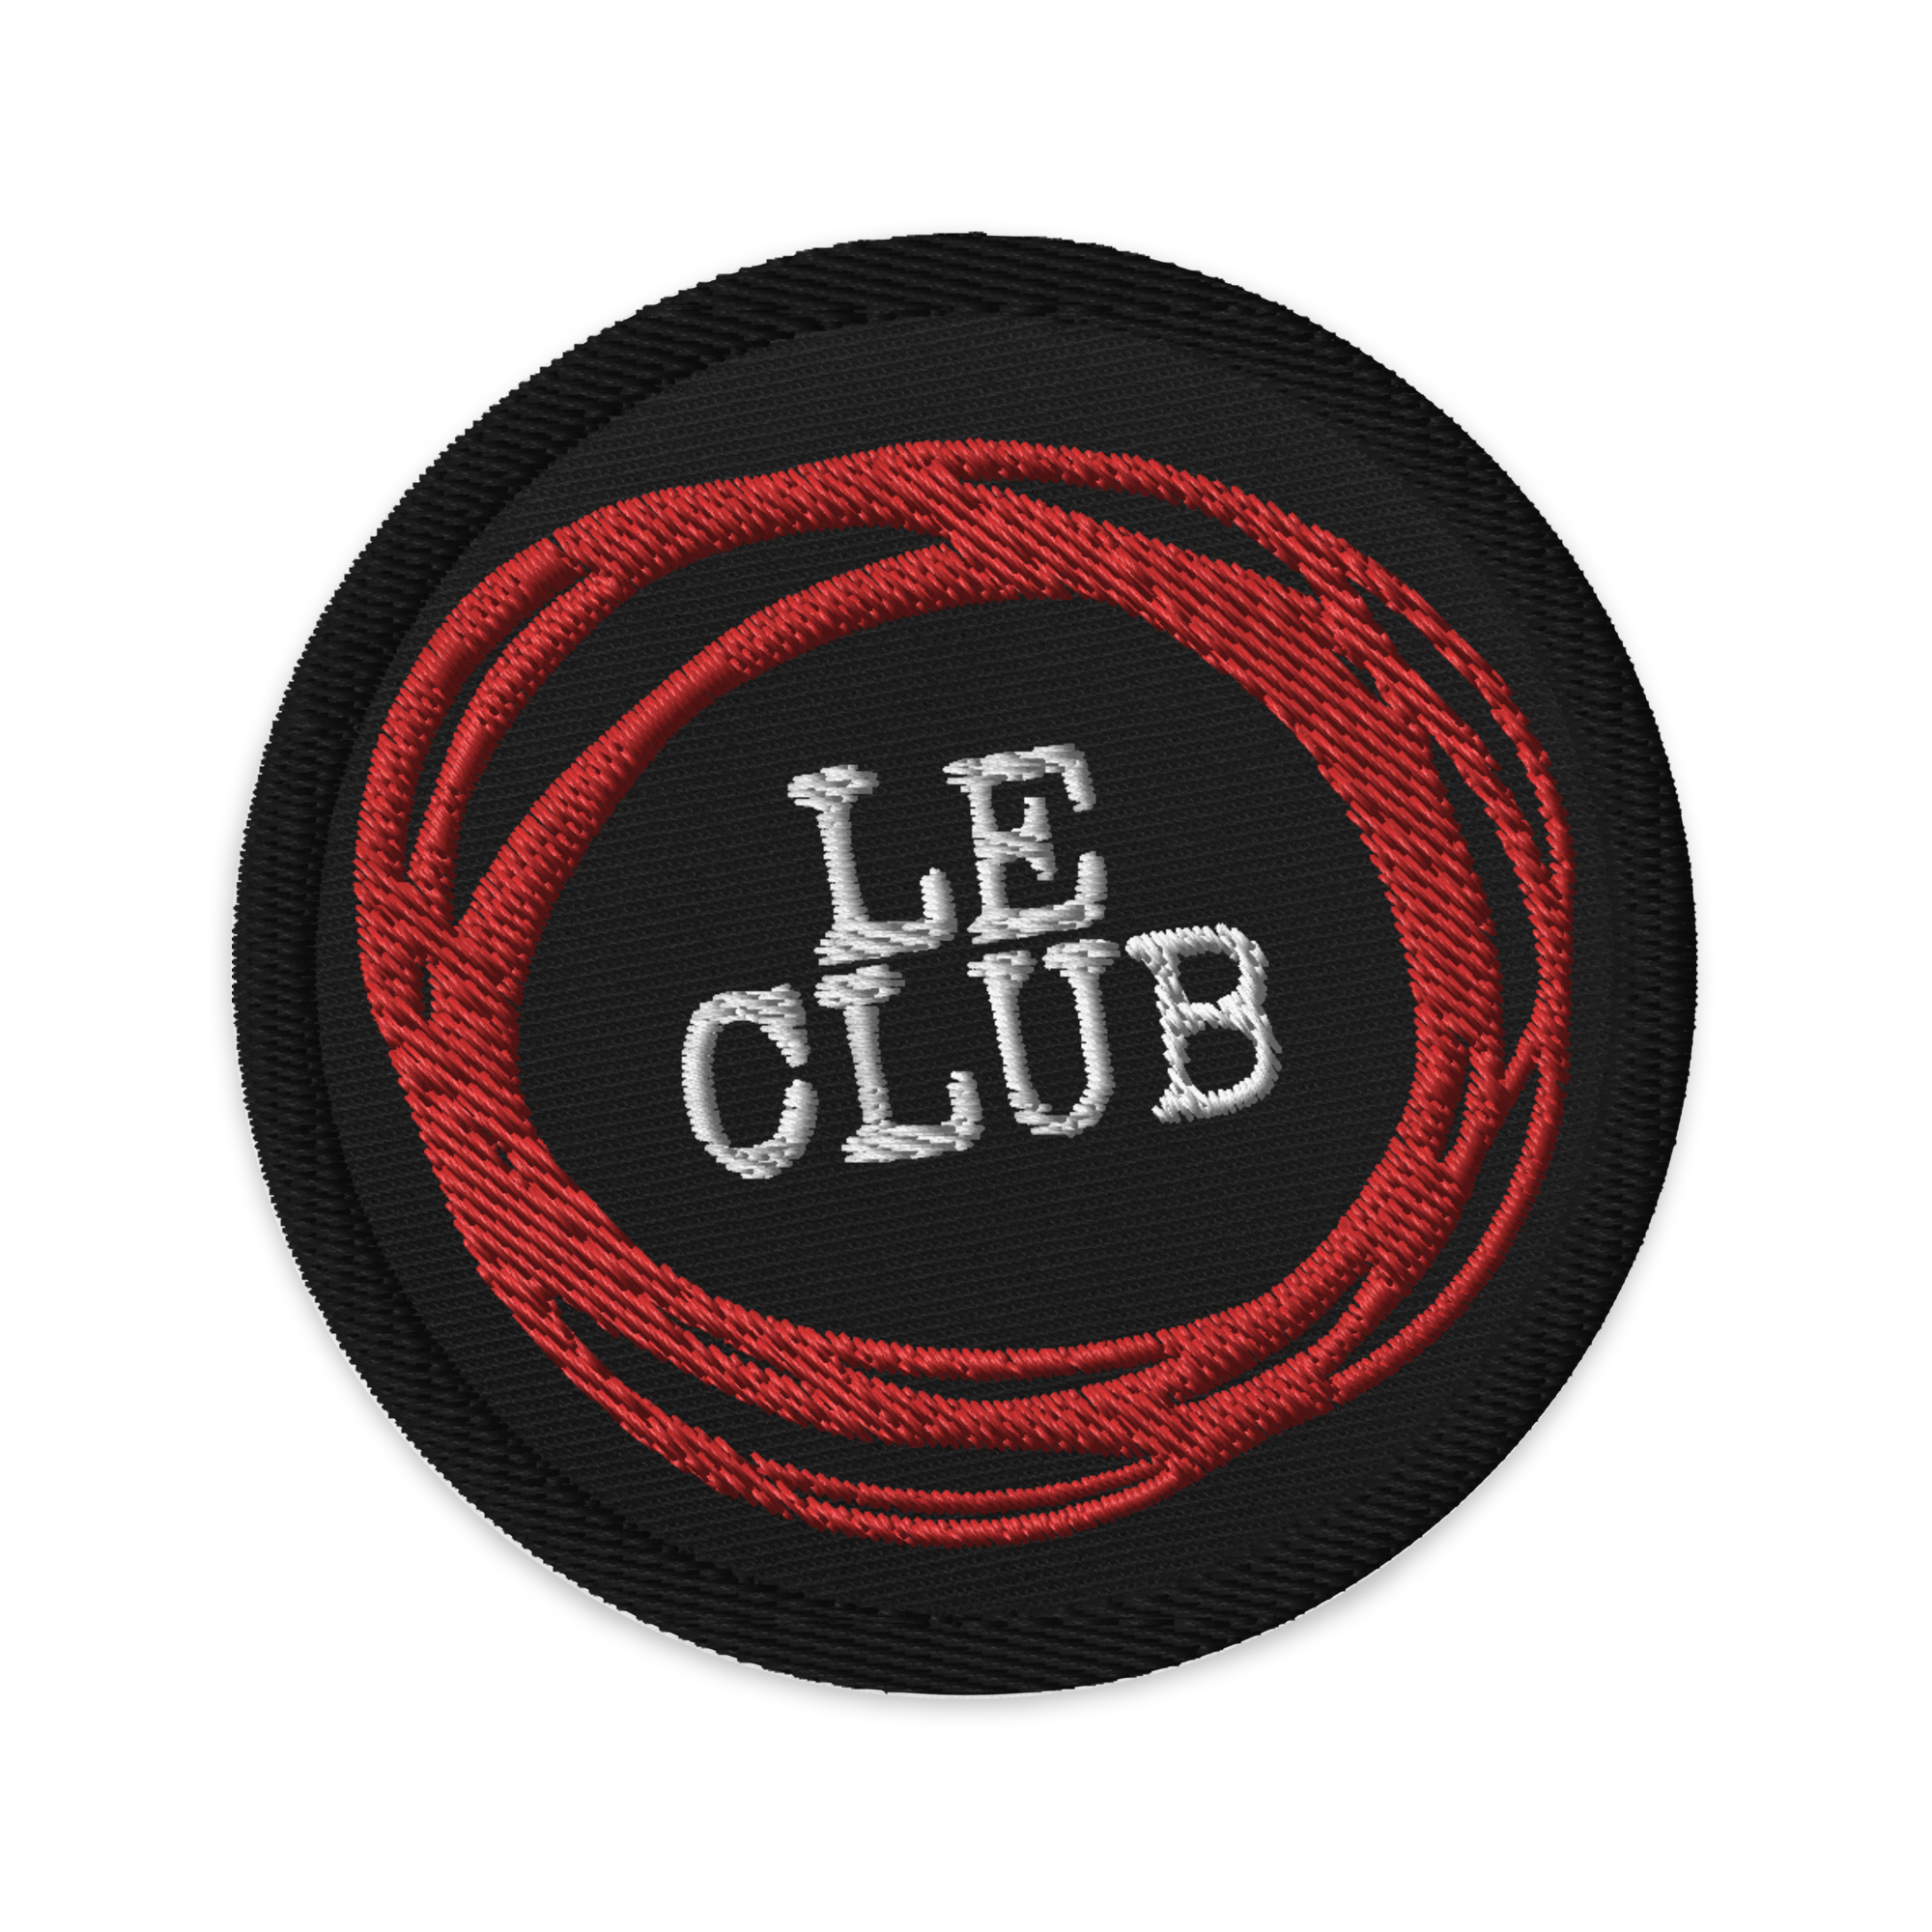 Paperboy Le Club Embroidered patches